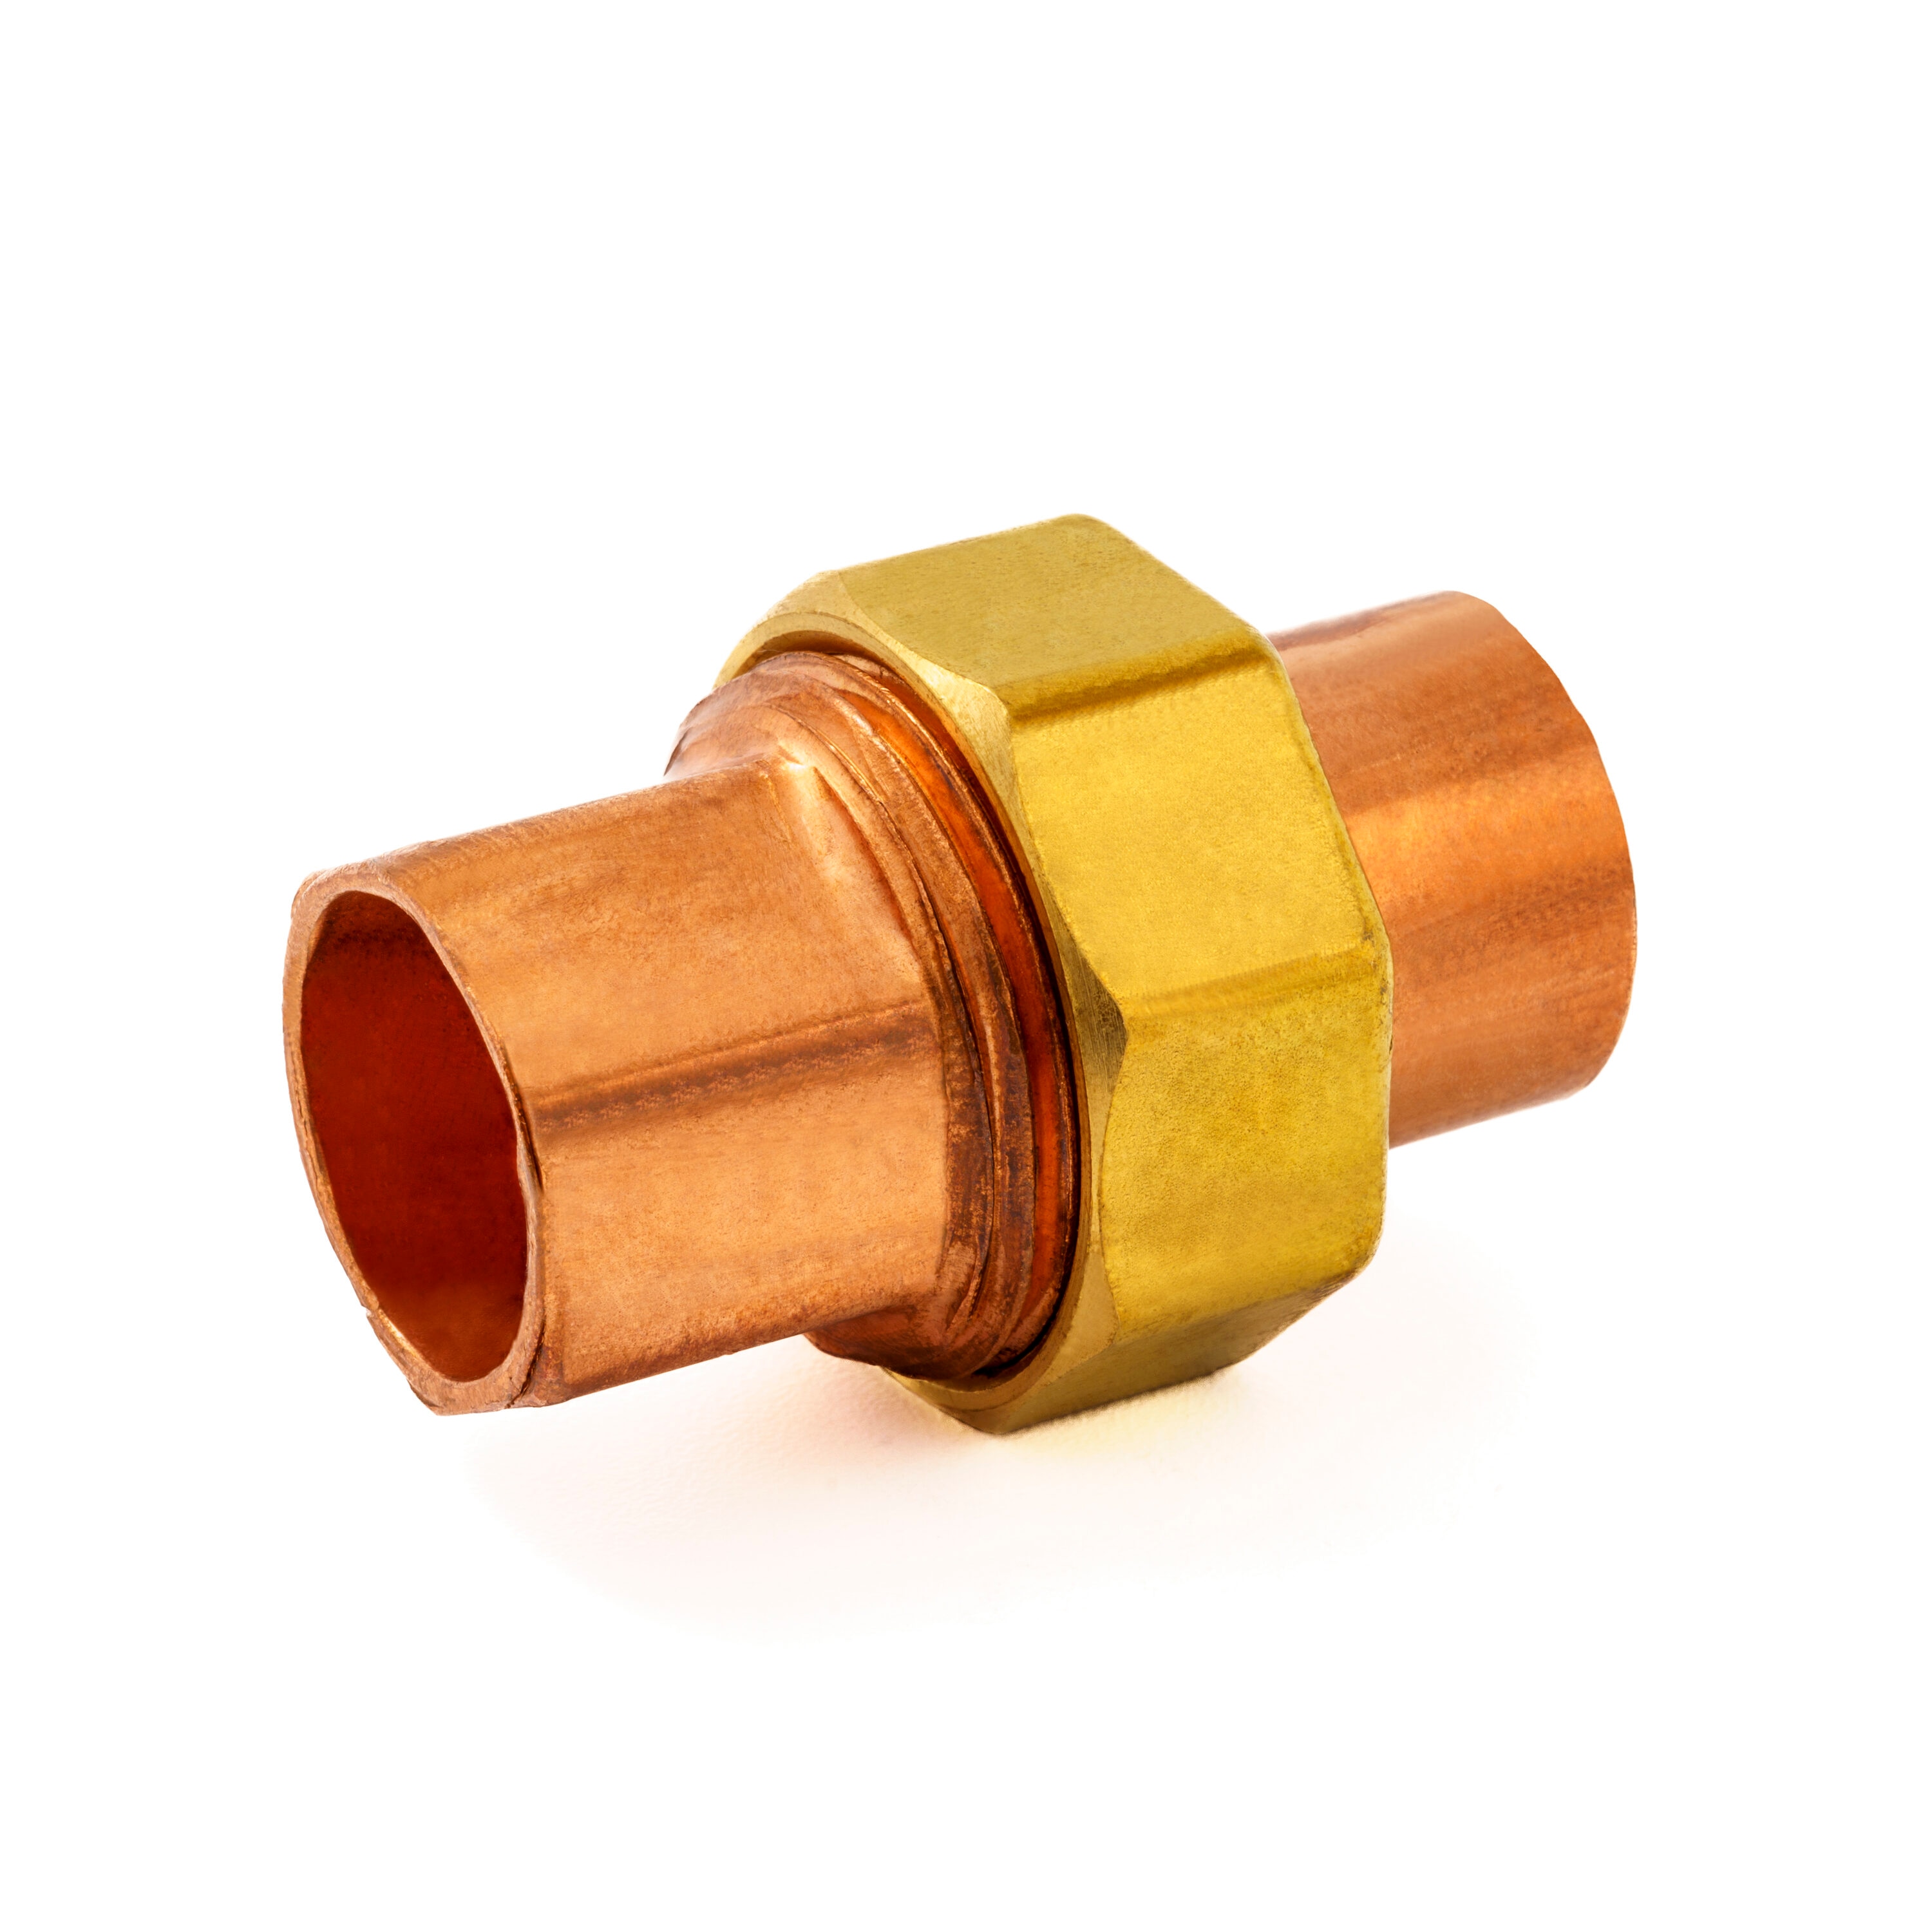 Streamline 3/4-in Copper Union in the Copper Pipe & Fittings department at